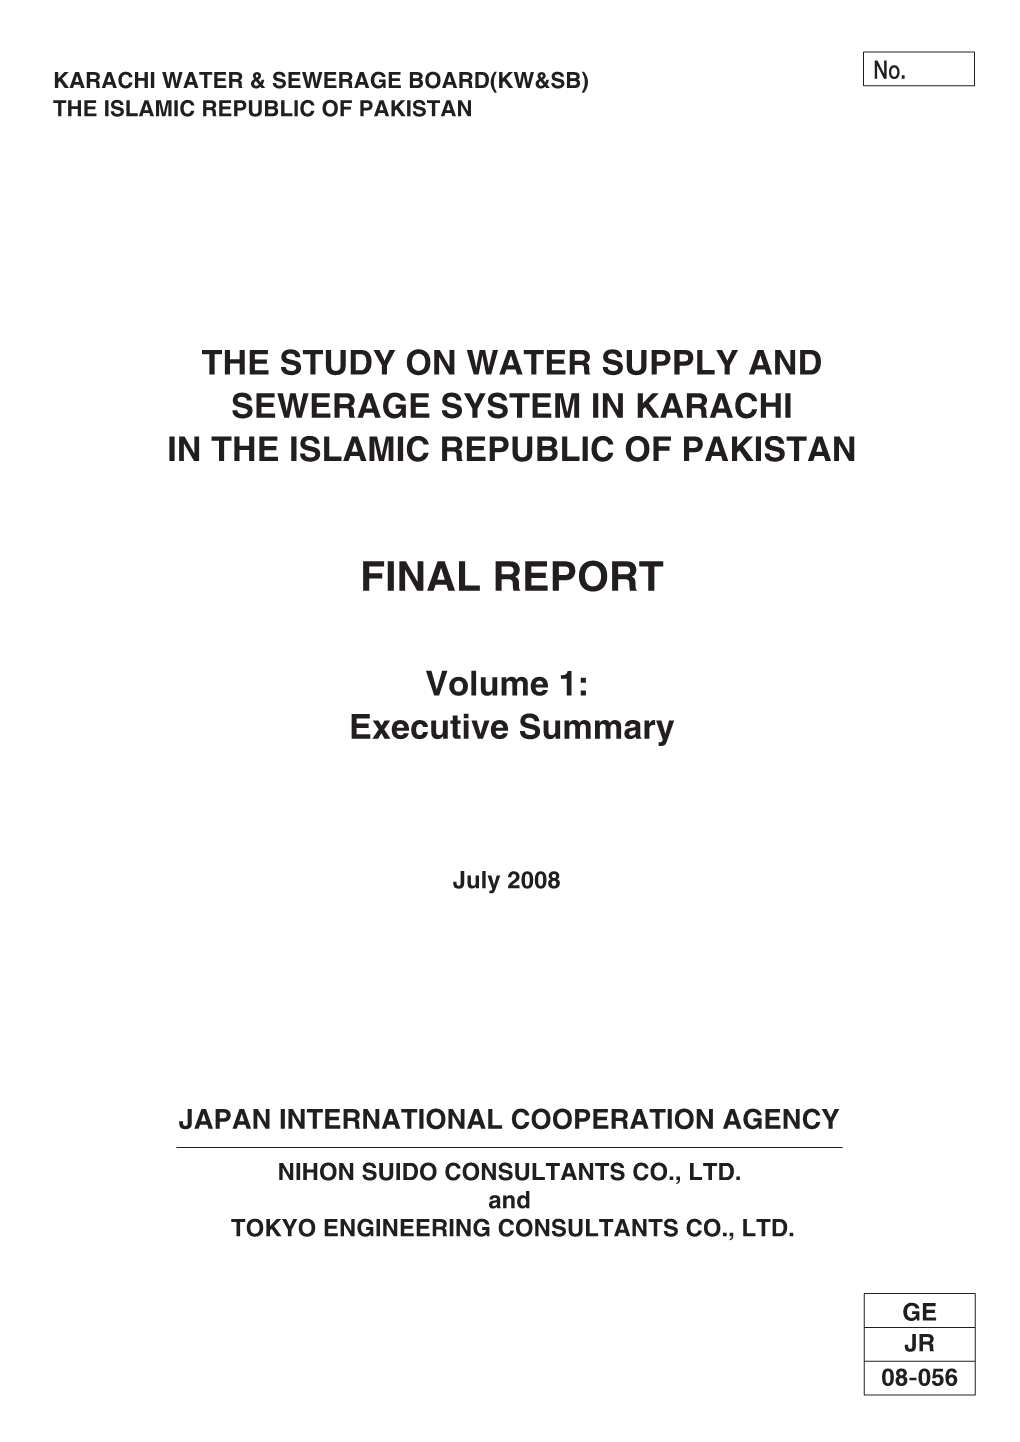 The Study on Water Supply and Sewerage System in Karachi in the Islamic Republic of Pakistan